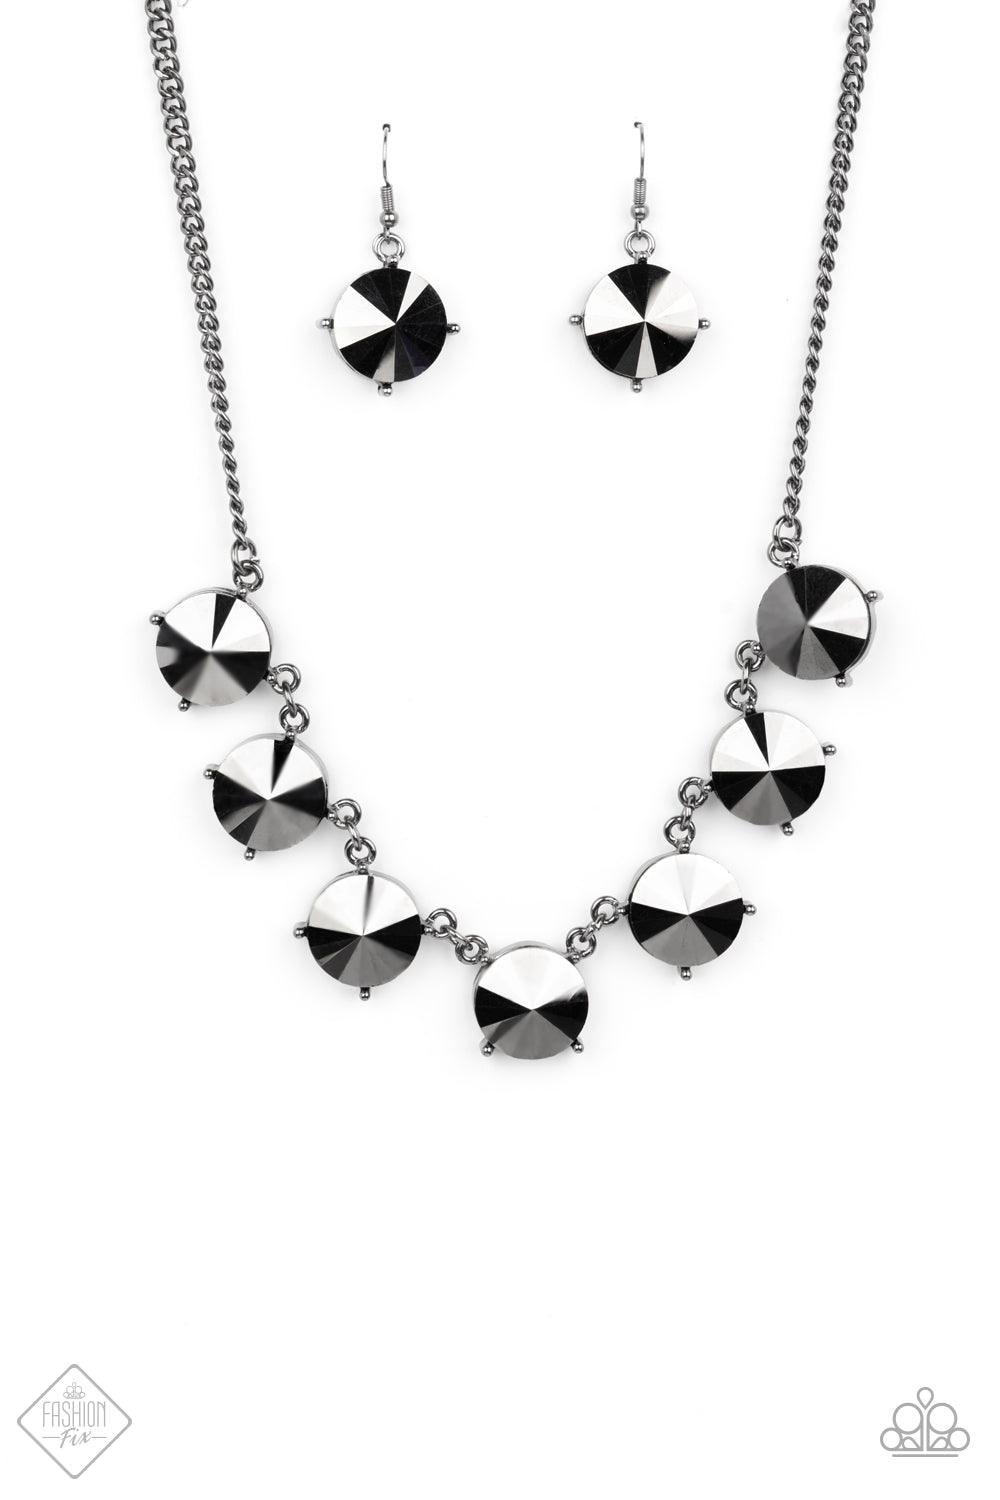 Paparazzi Accessories The SHOWCASE Must Go On - Black Attached to glistening gunmetal chains, a dramatic collection of oversized hematite rhinestones boldly links into a smoldering statement piece below the collar. Features an adjustable clasp closure. So